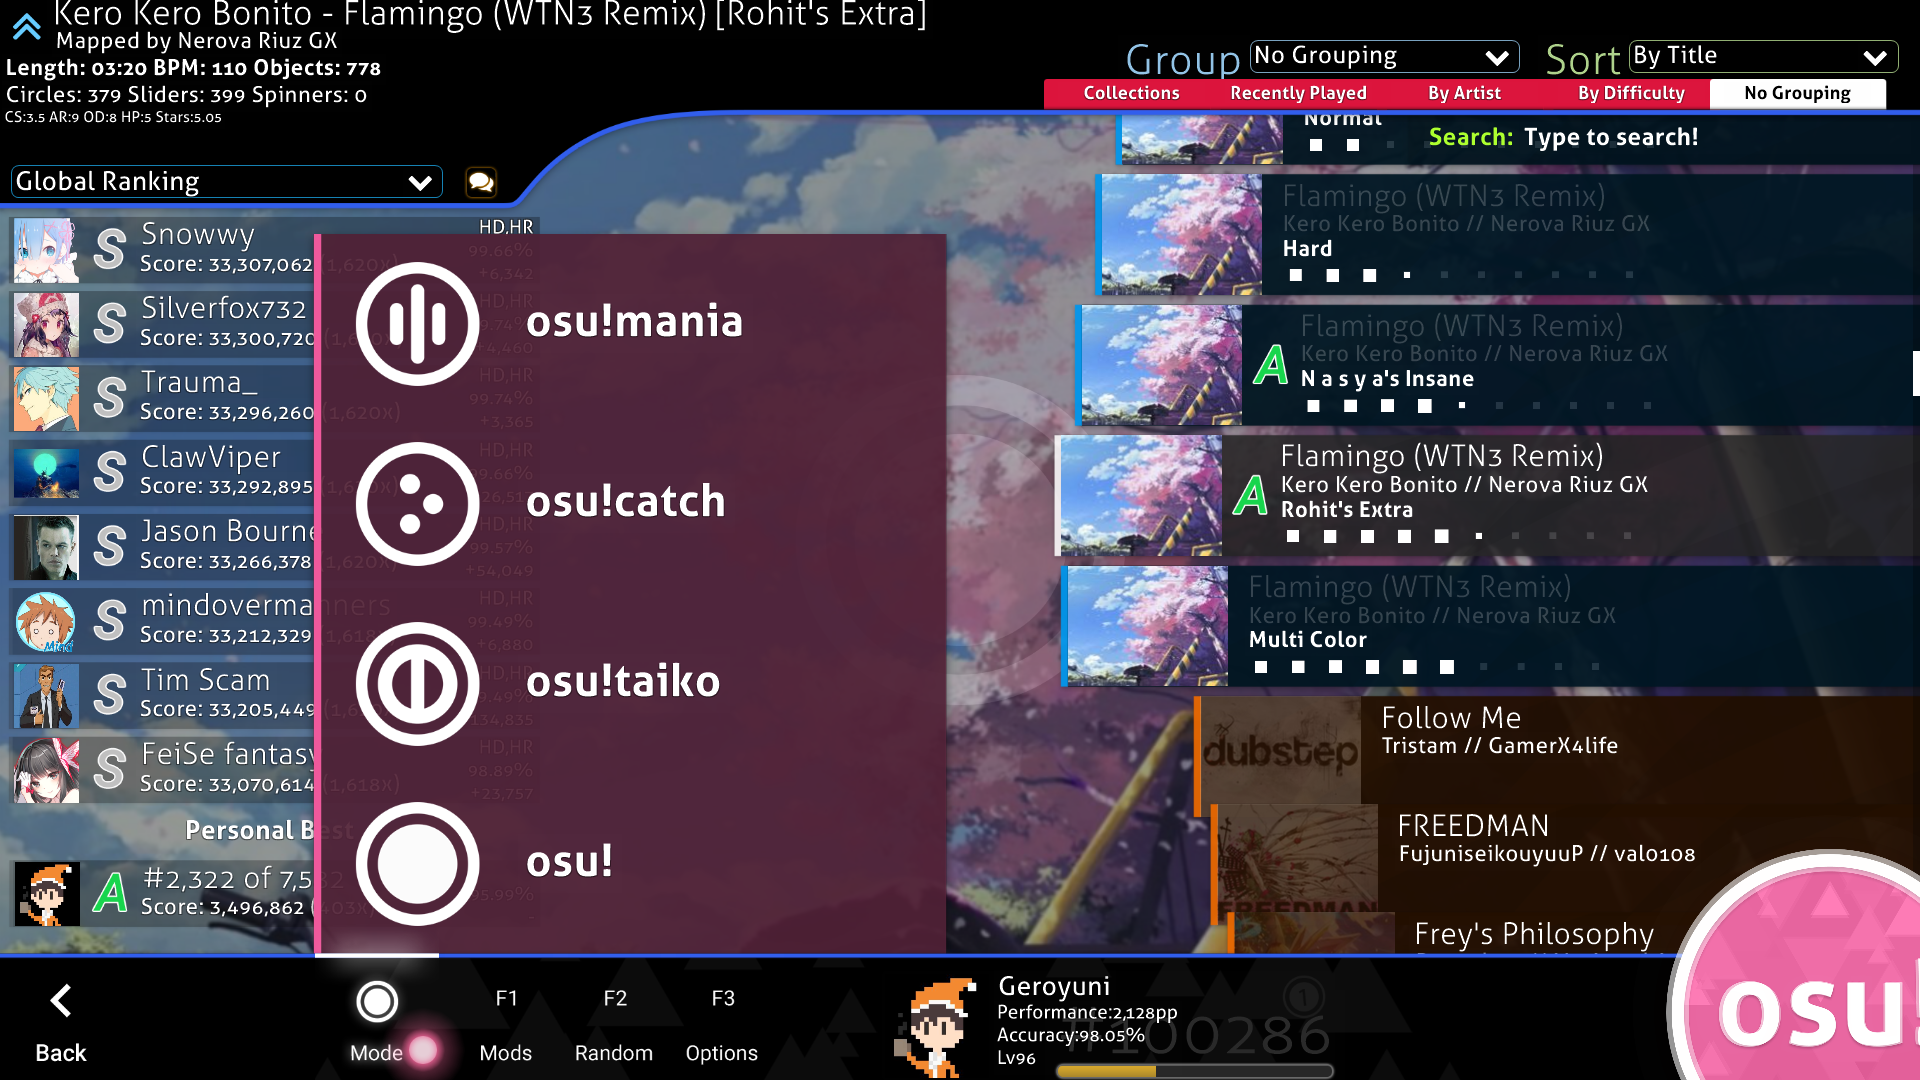 osu!mania barlines are too present (and no classic skin support